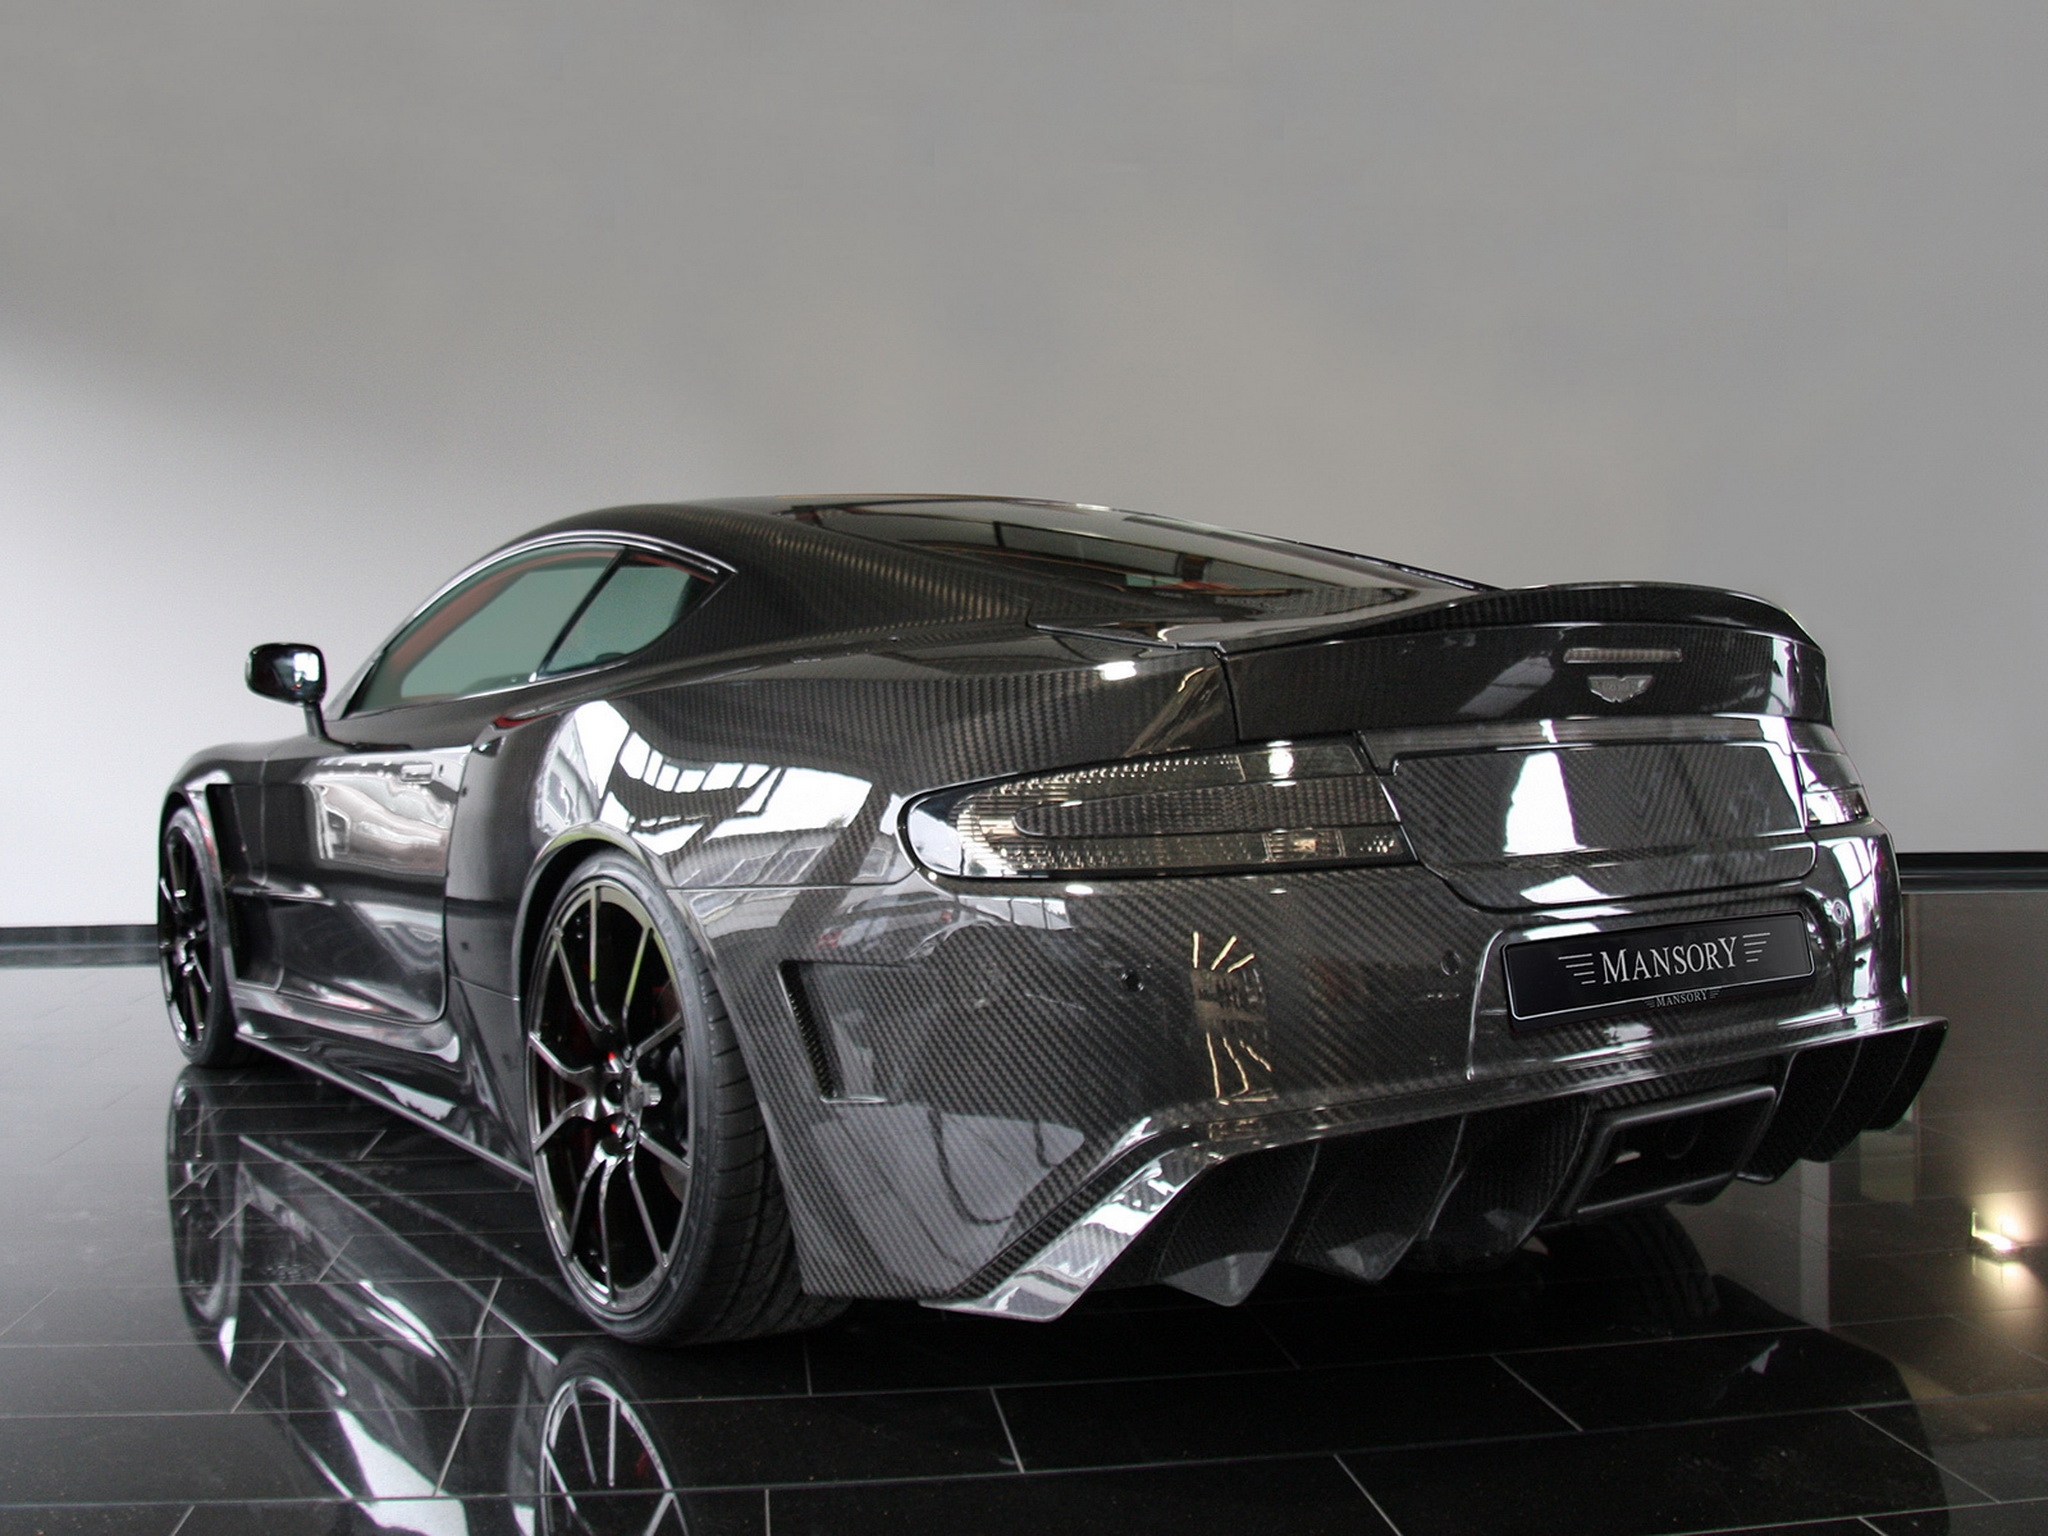 aston martin, carbon, cars, black, reflection, back view, rear view, style, dbs, 2009, mansory HD wallpaper